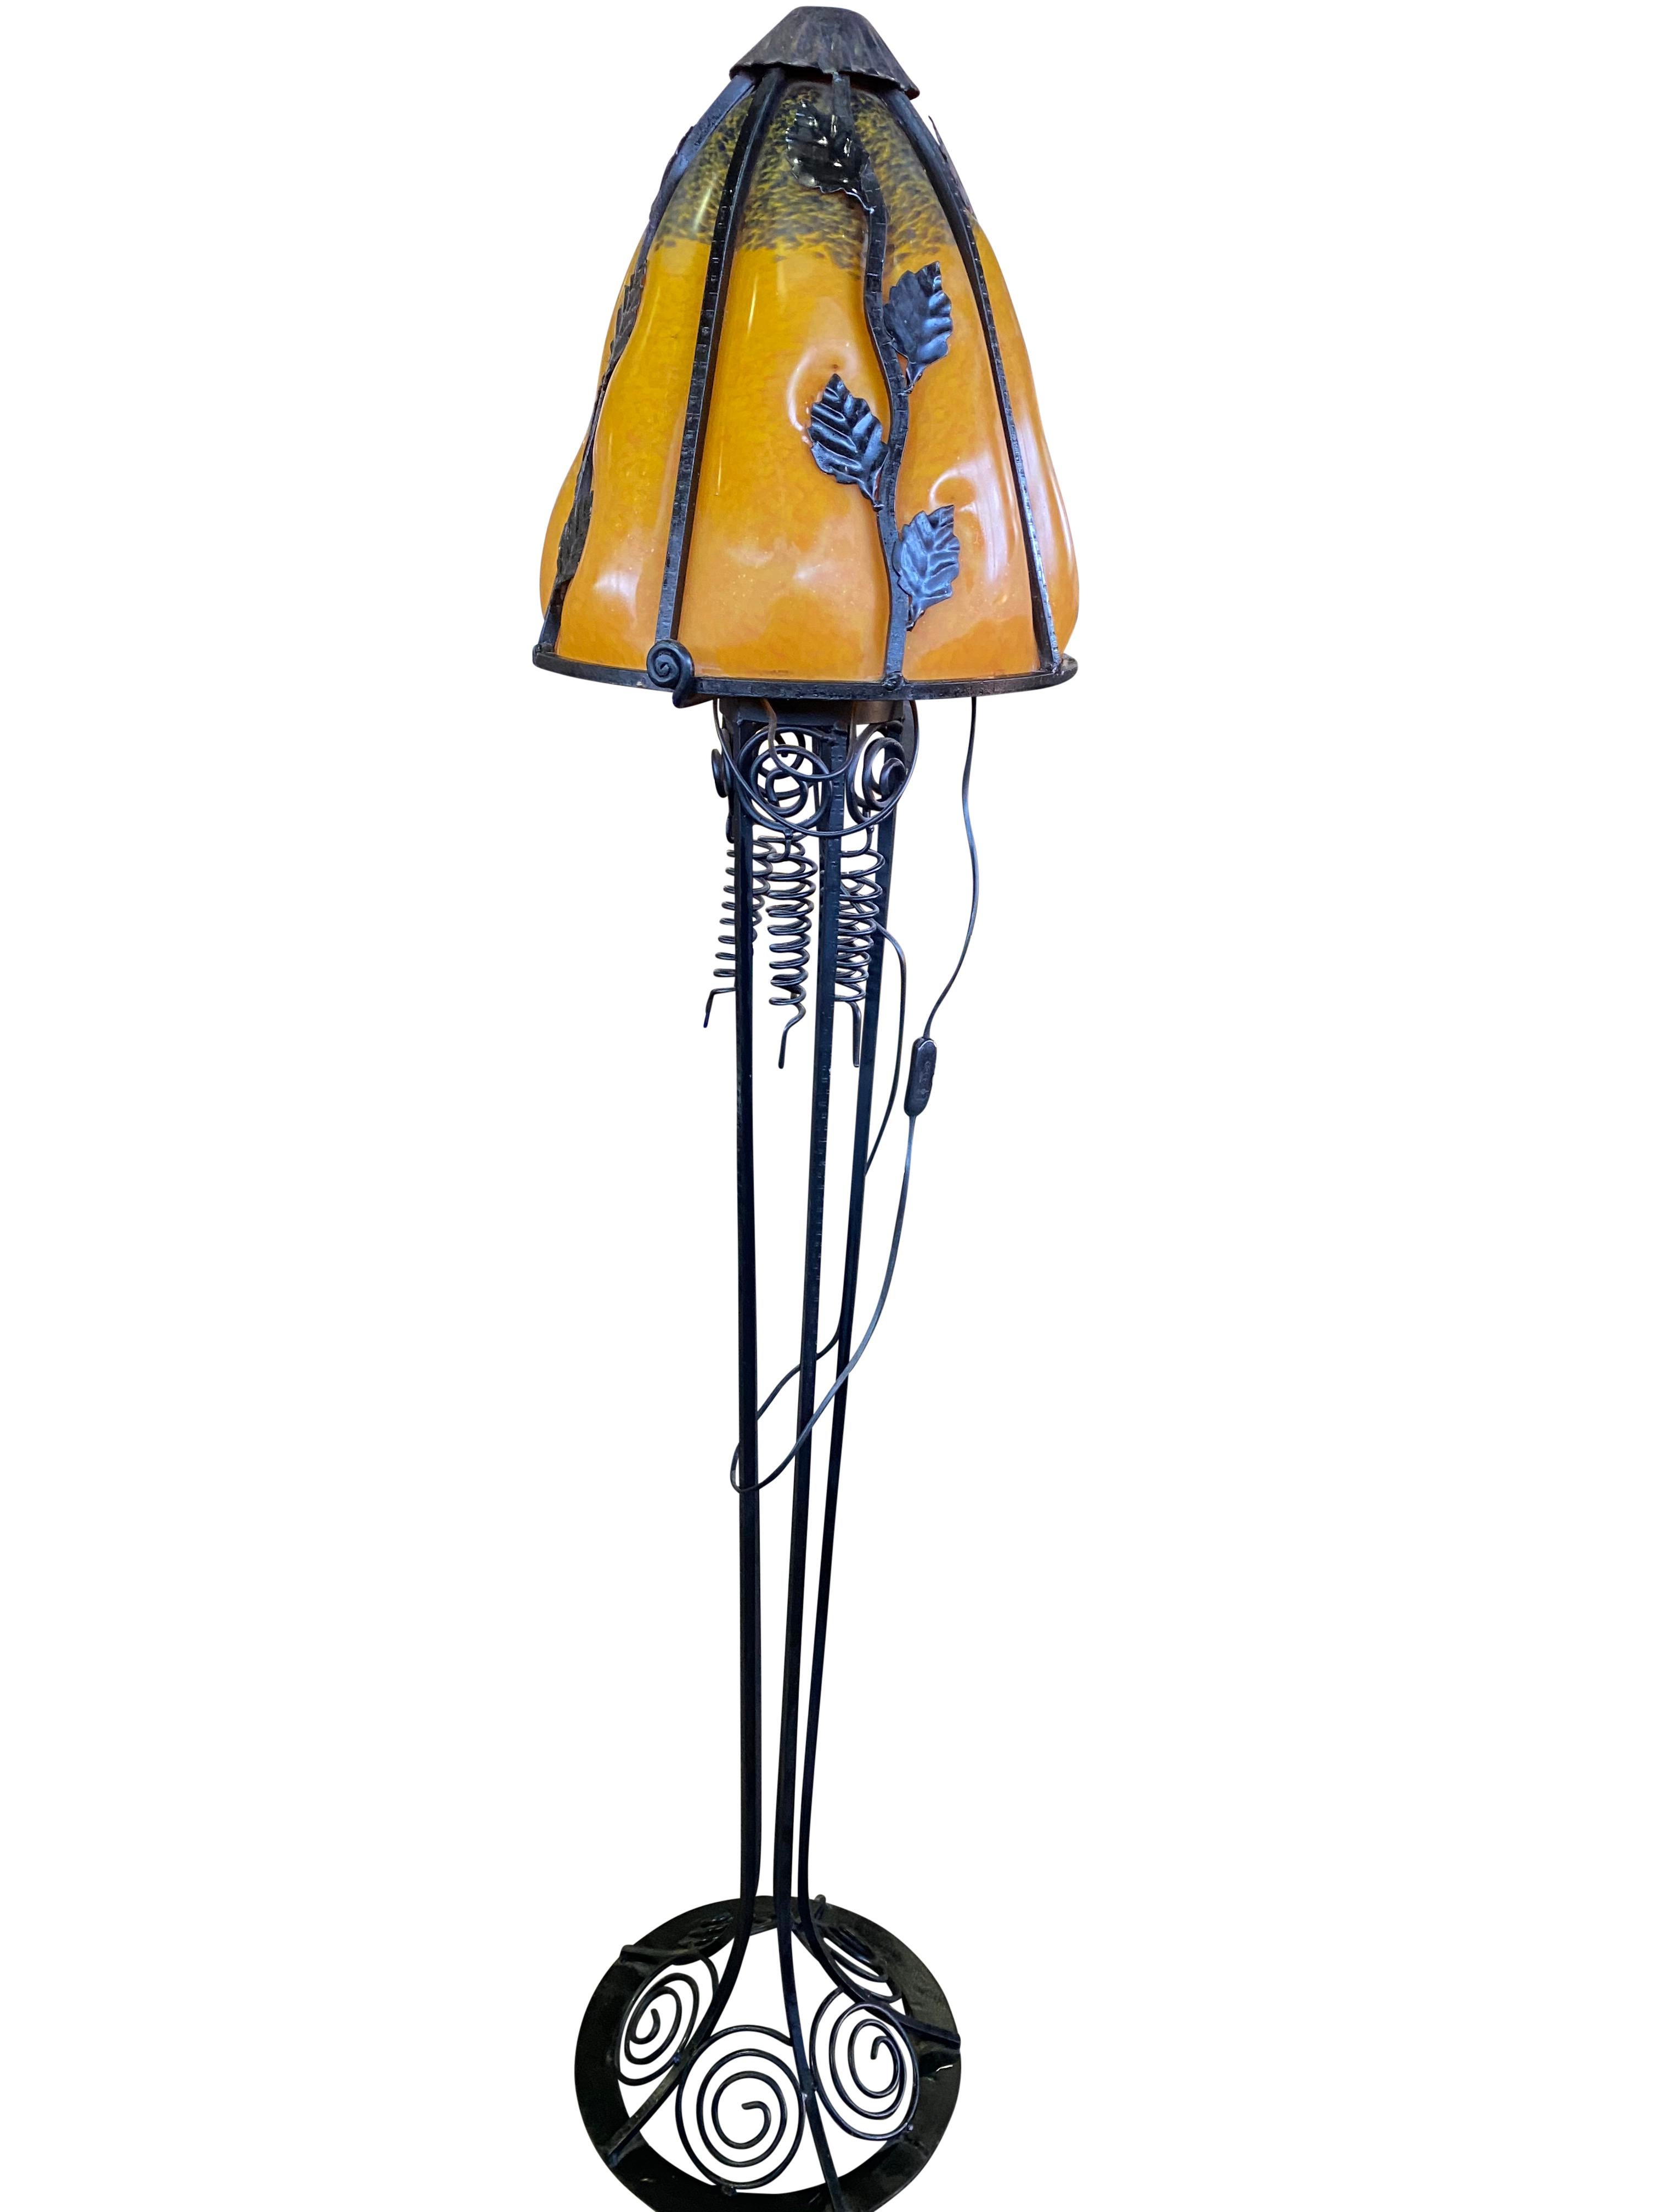 A wonderful French Art Nouveau style standard lamp, 20th century. The stands are handmade in wrought iron with black finish patina and hammered with floral pattern. The metalwork is of excellent quality.
Crowned with bright colored shades in